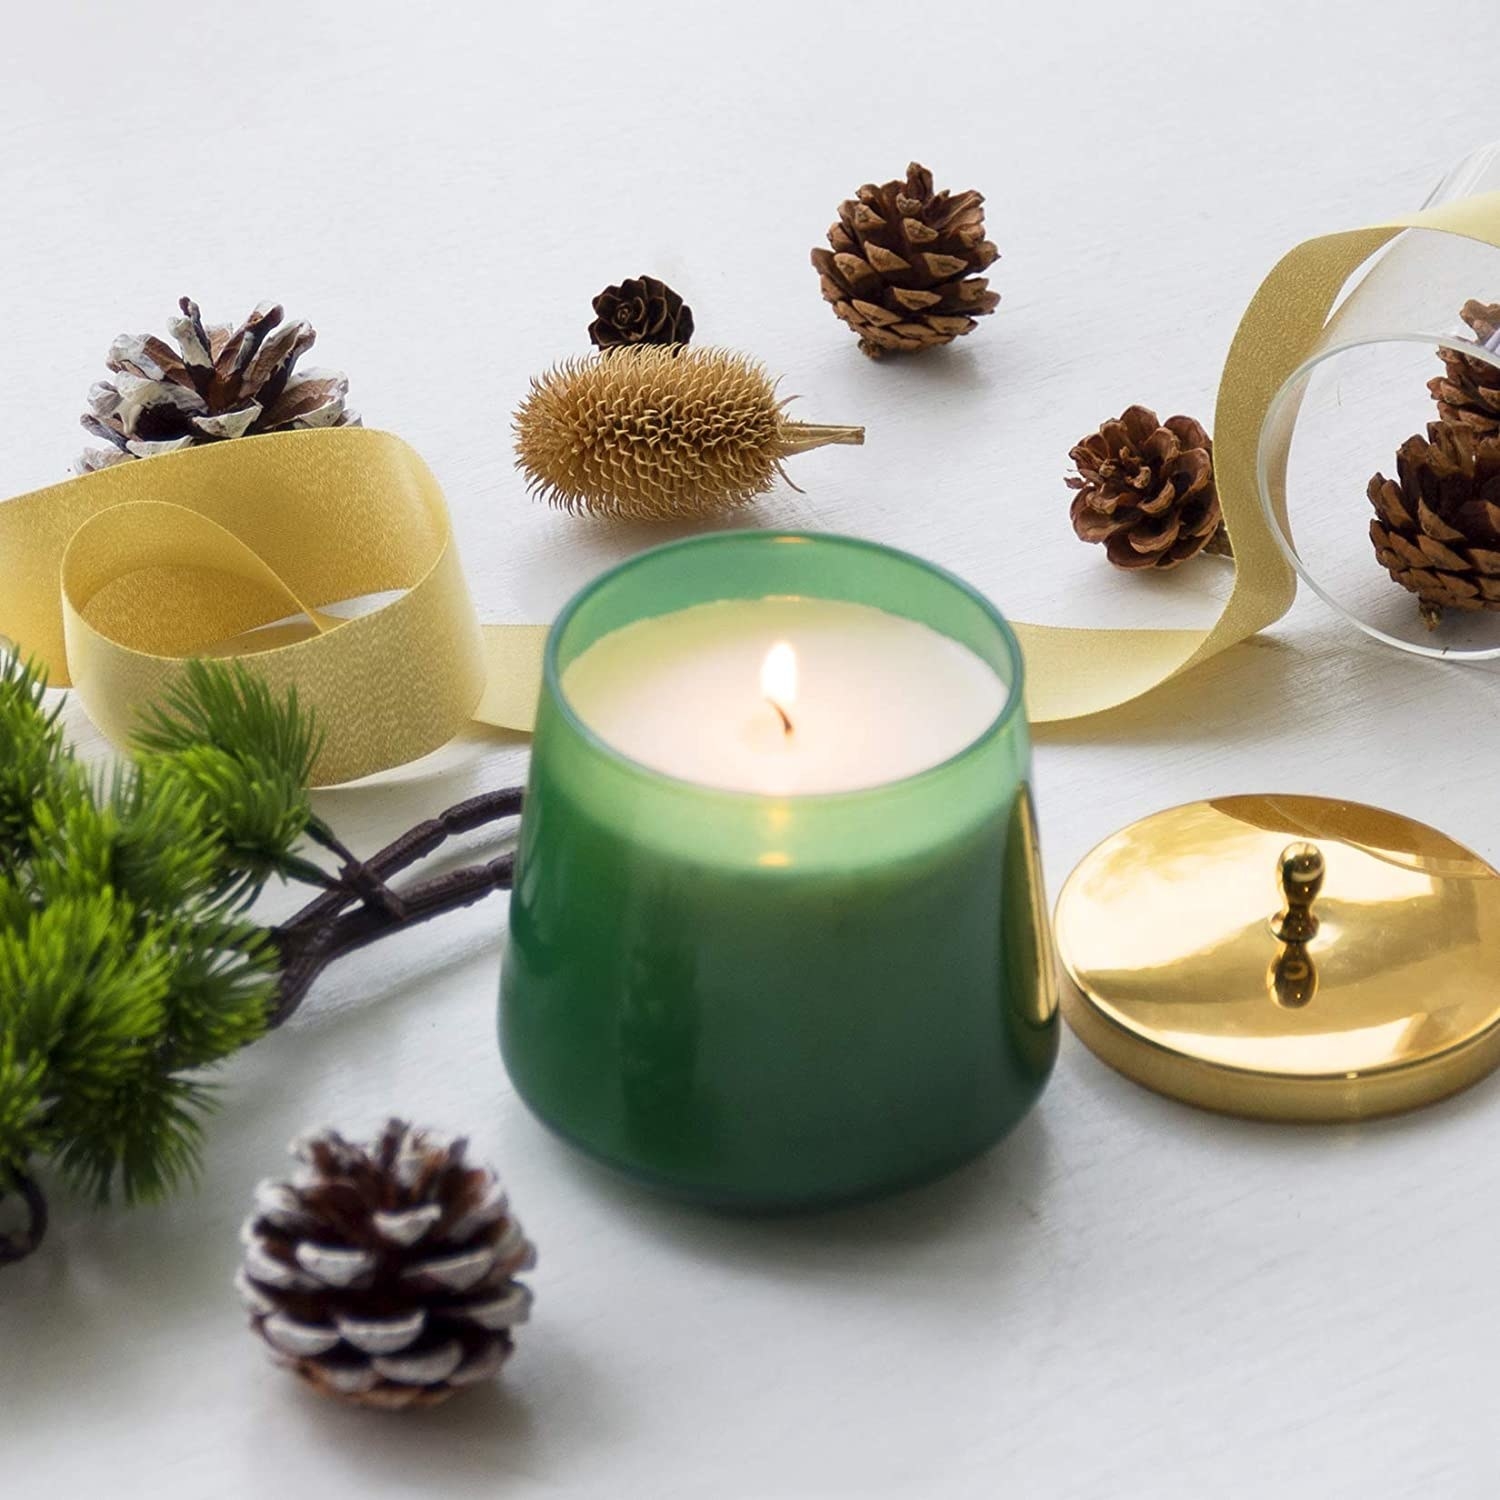 The La Jolie Muse cedar and balsam scented candle surrounded by pinecones and other natural decor